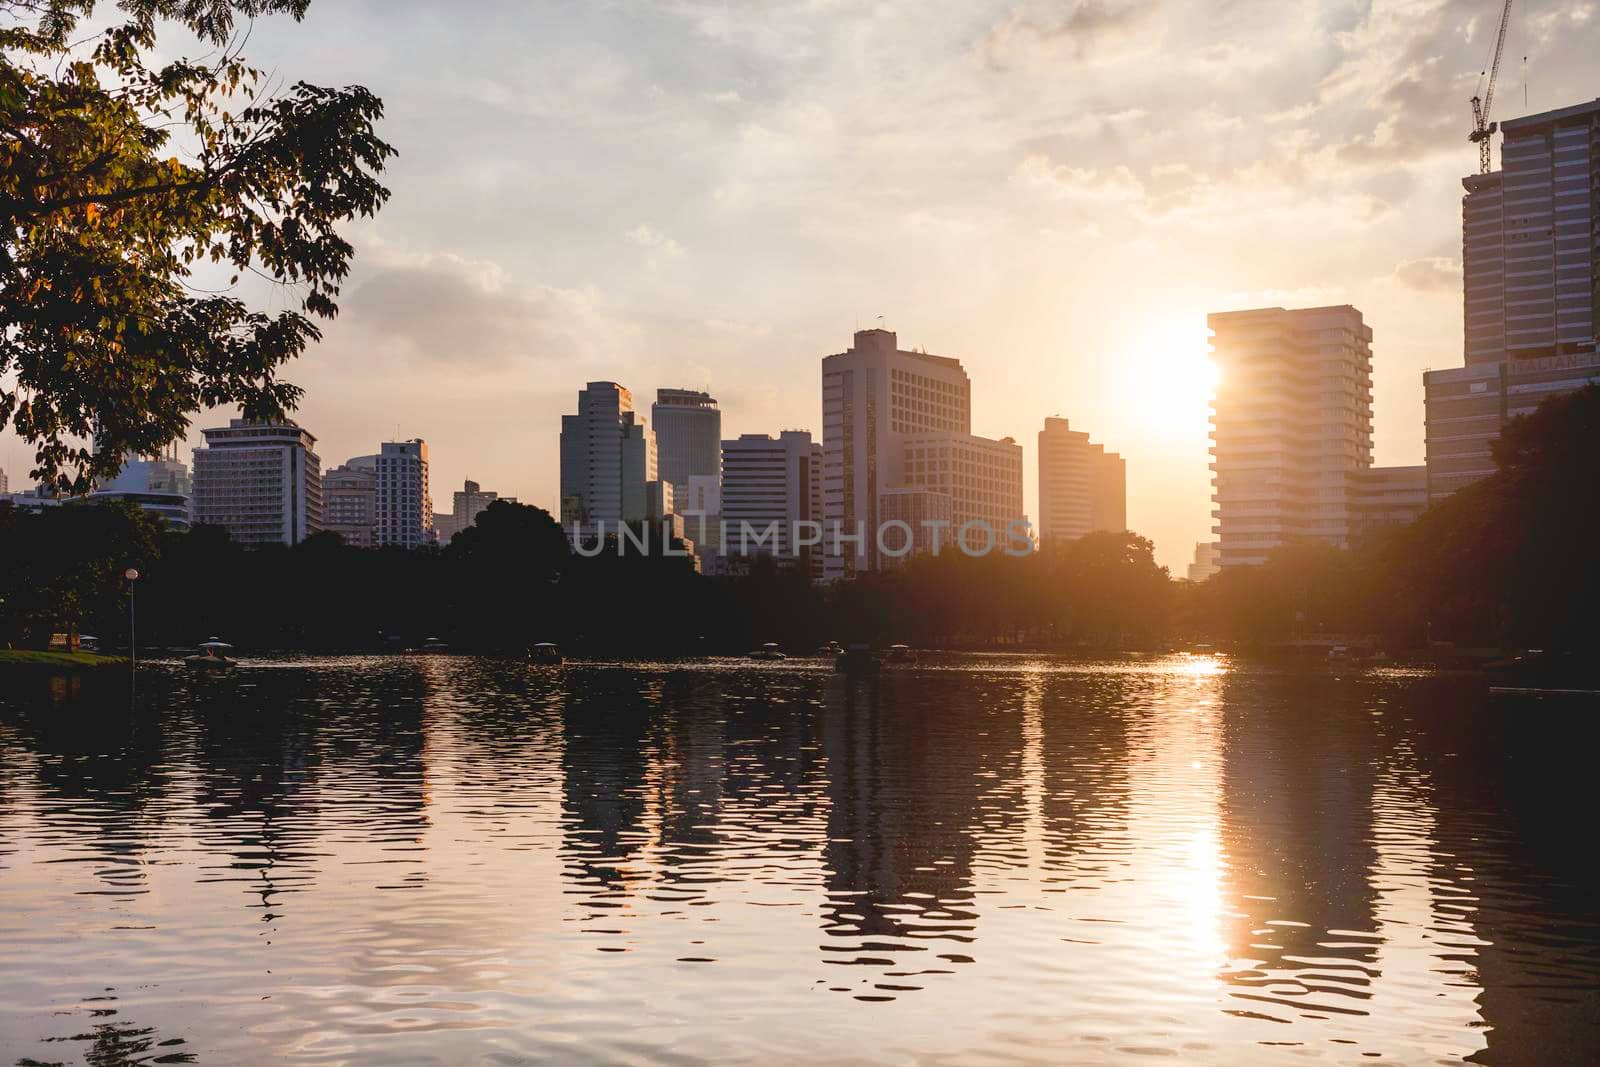 BANGKOK, THAILAND - October 22, 2012. Panorama of downtown skyscrapers from Lumpini park. Sunset view over pond in recreation park.